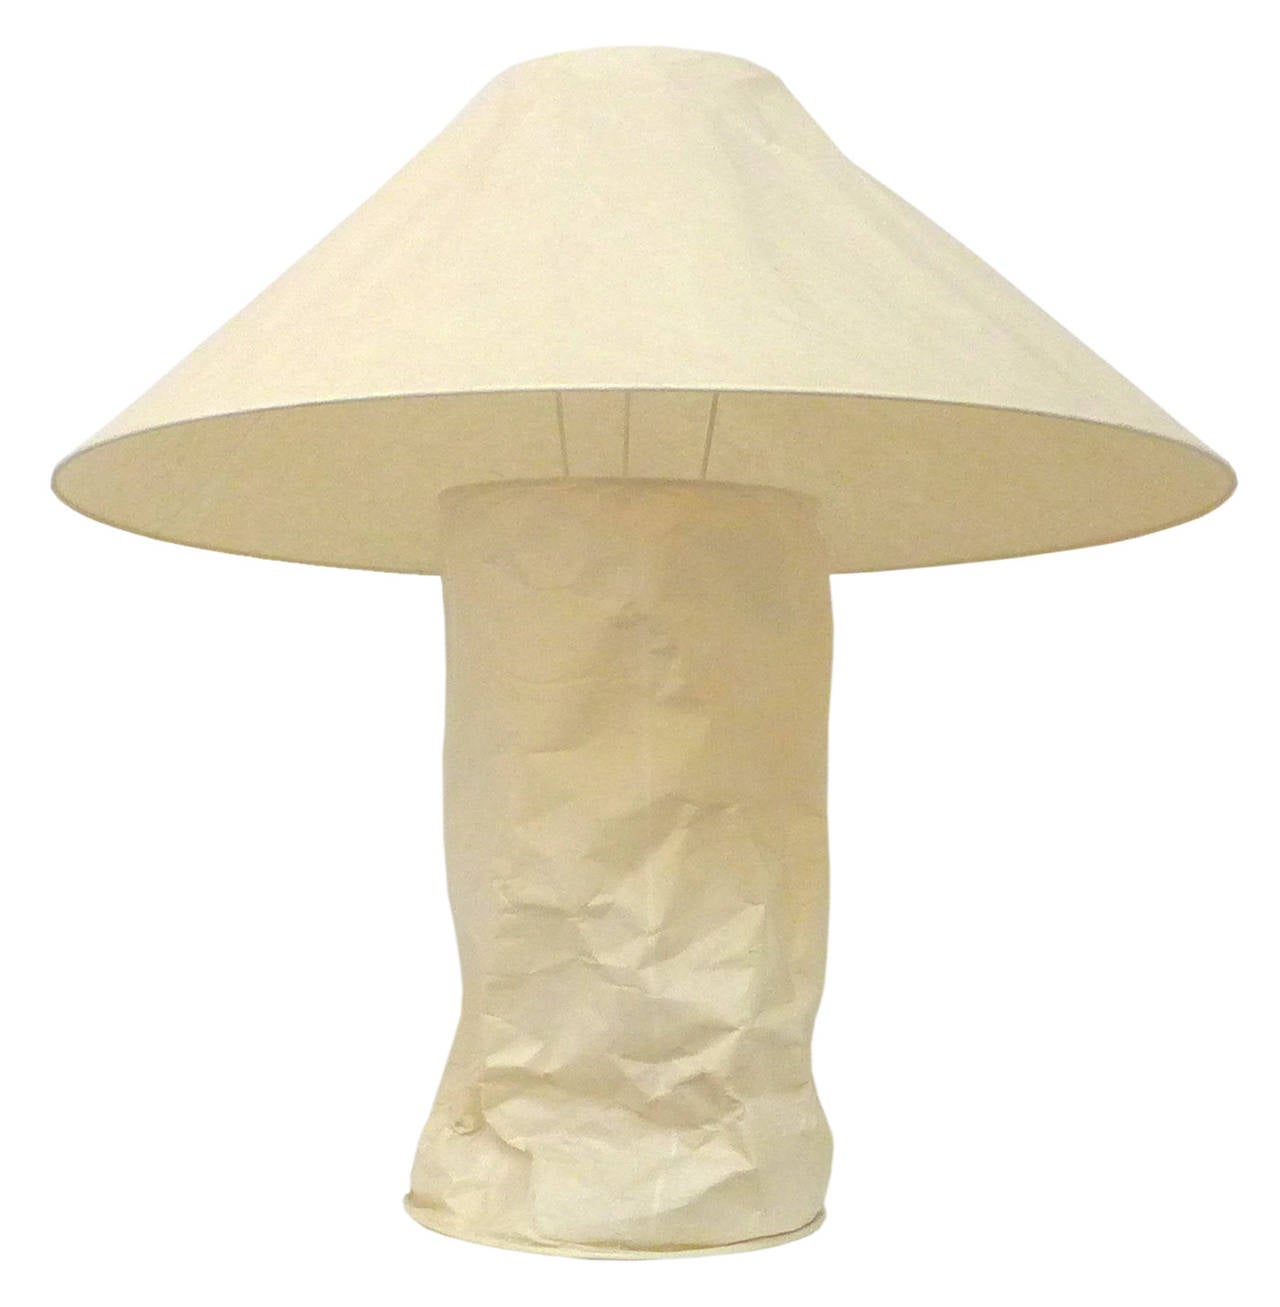 The unique and beautiful Lampampe table lamp by Ingo Maurer. Created for his eponymous company in 1980, this imaginative table-lamp-as-light-sculpture wears an exterior of intentionally wrinkled Japanese paper, emitting a gentle diffused light